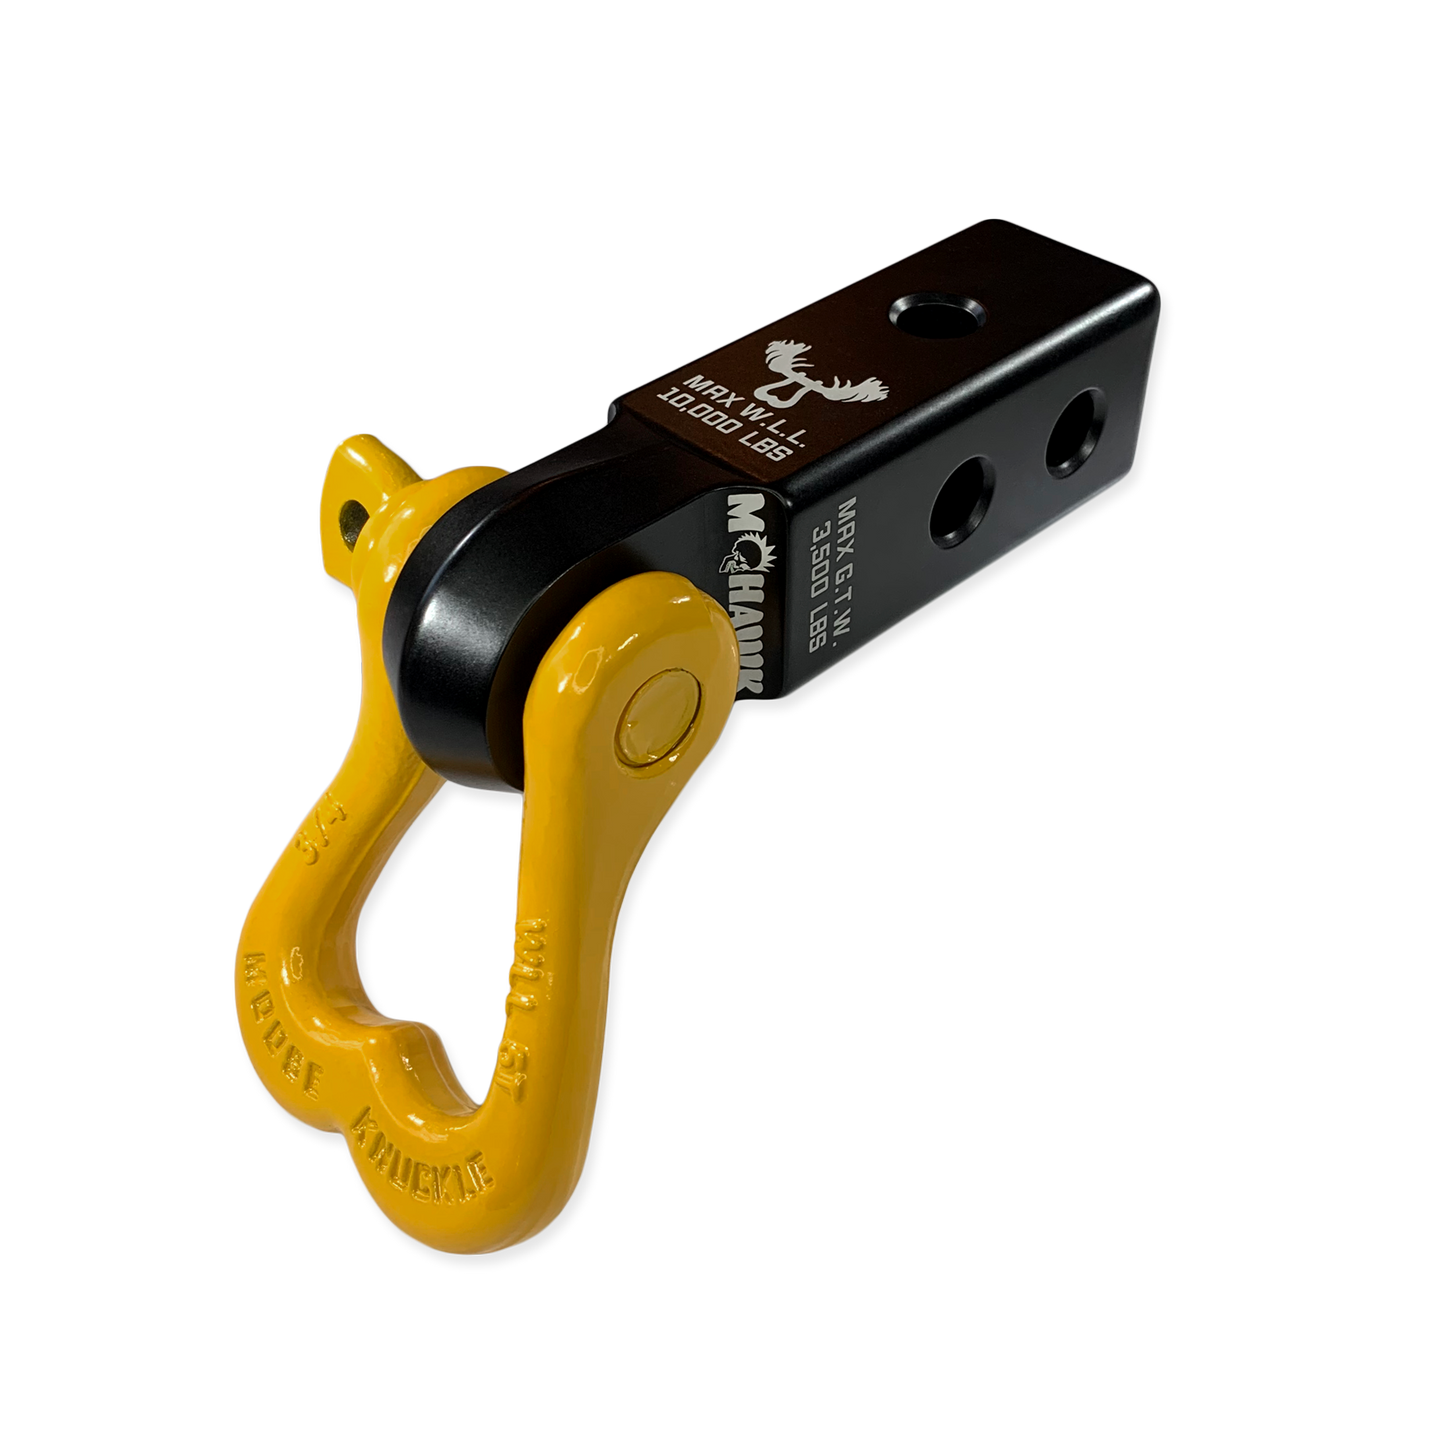 XL Shackle and Mohawk 2.0 Receiver Combo